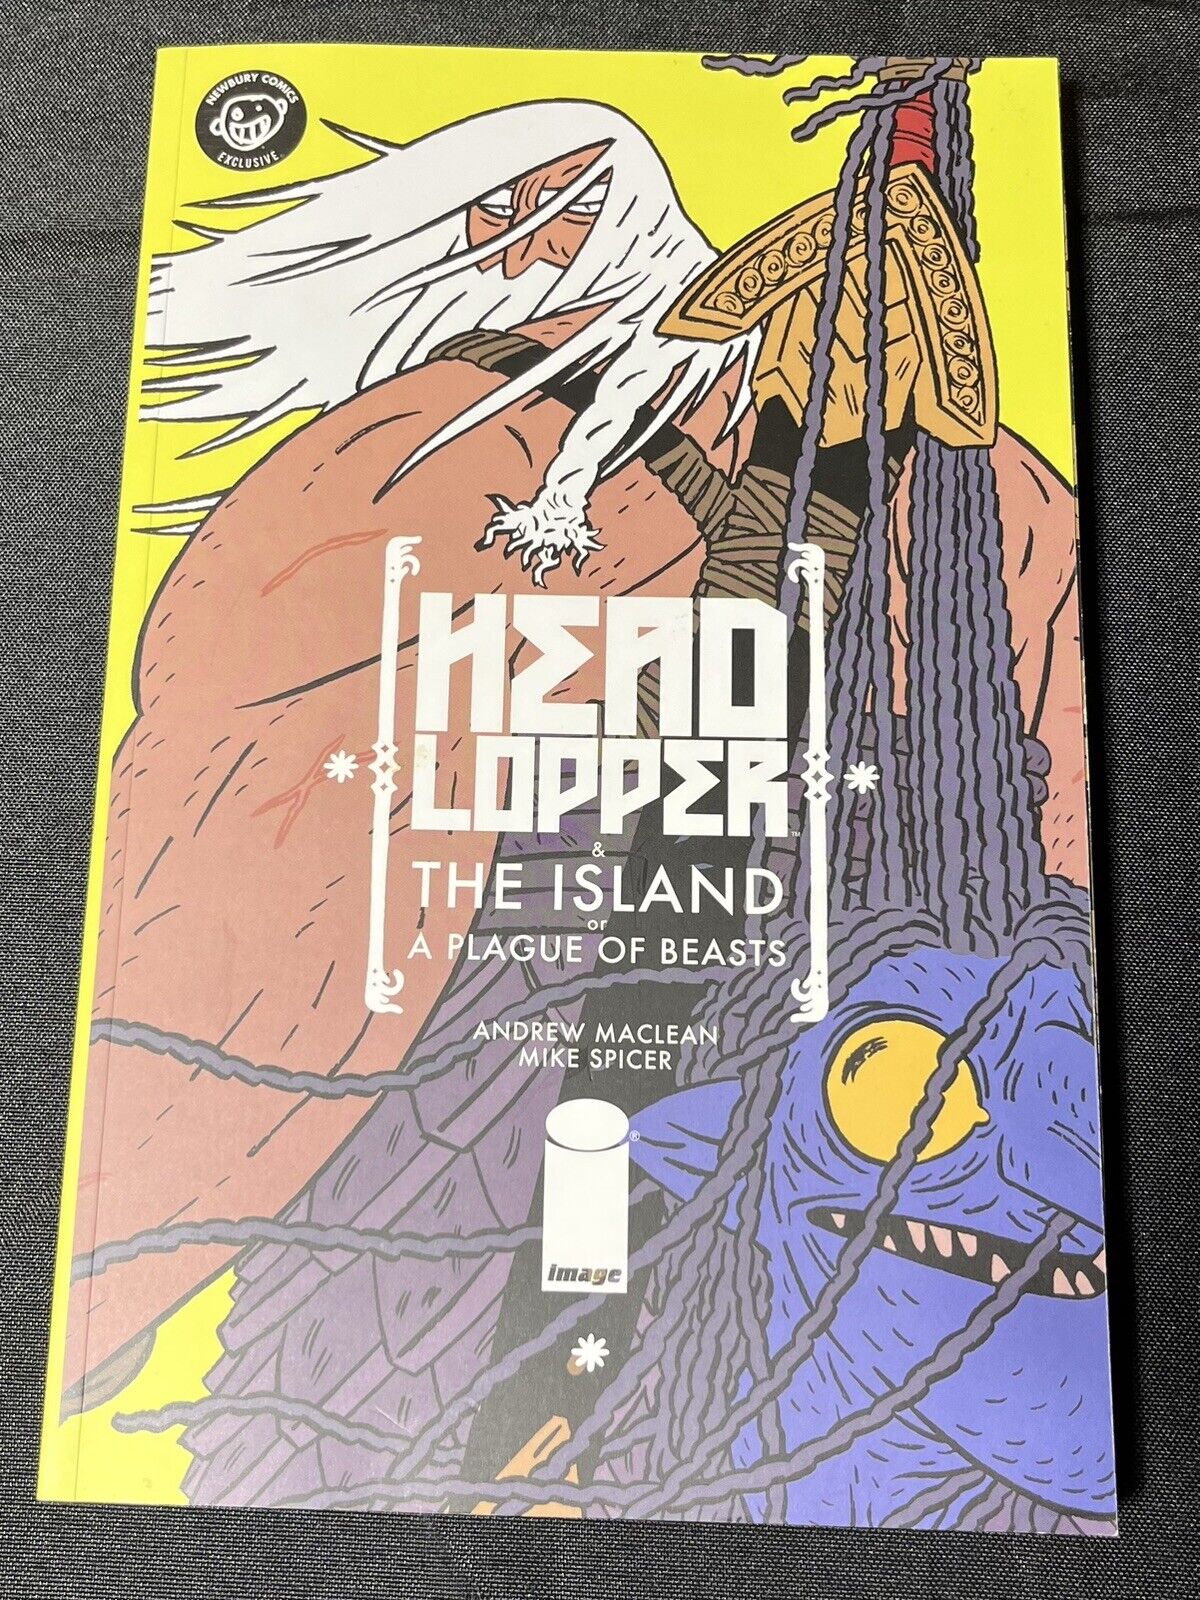 Head Lopper Volume 1: The Island or a Plague of Beasts Newbury Comics exclusive